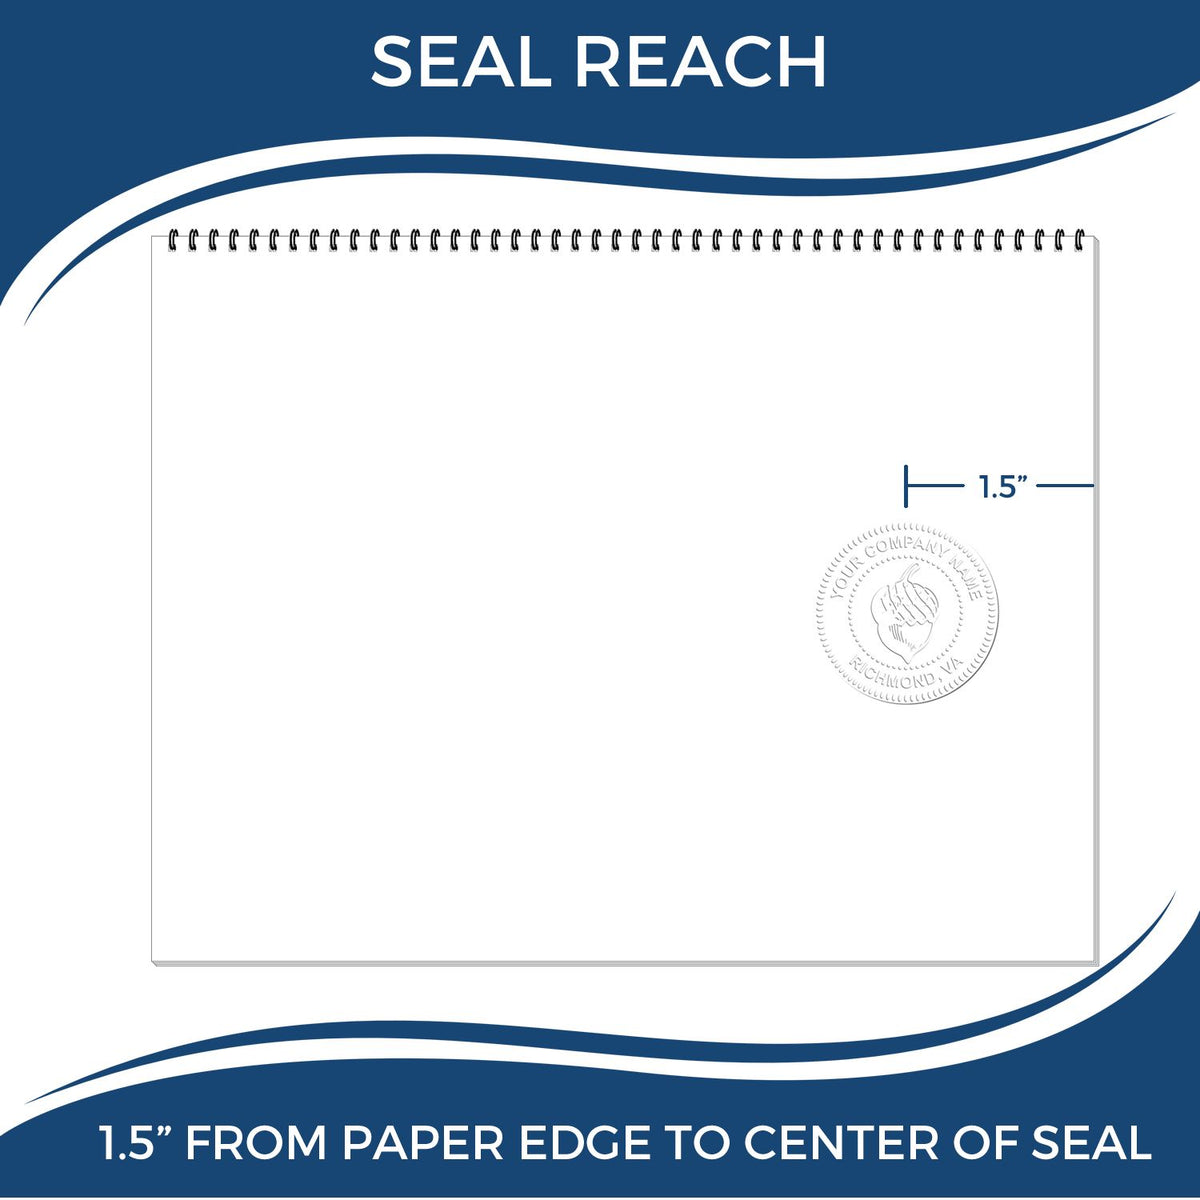 An infographic showing the seal reach which is represented by a ruler and a miniature seal image of the Soft Ohio Professional Geologist Seal